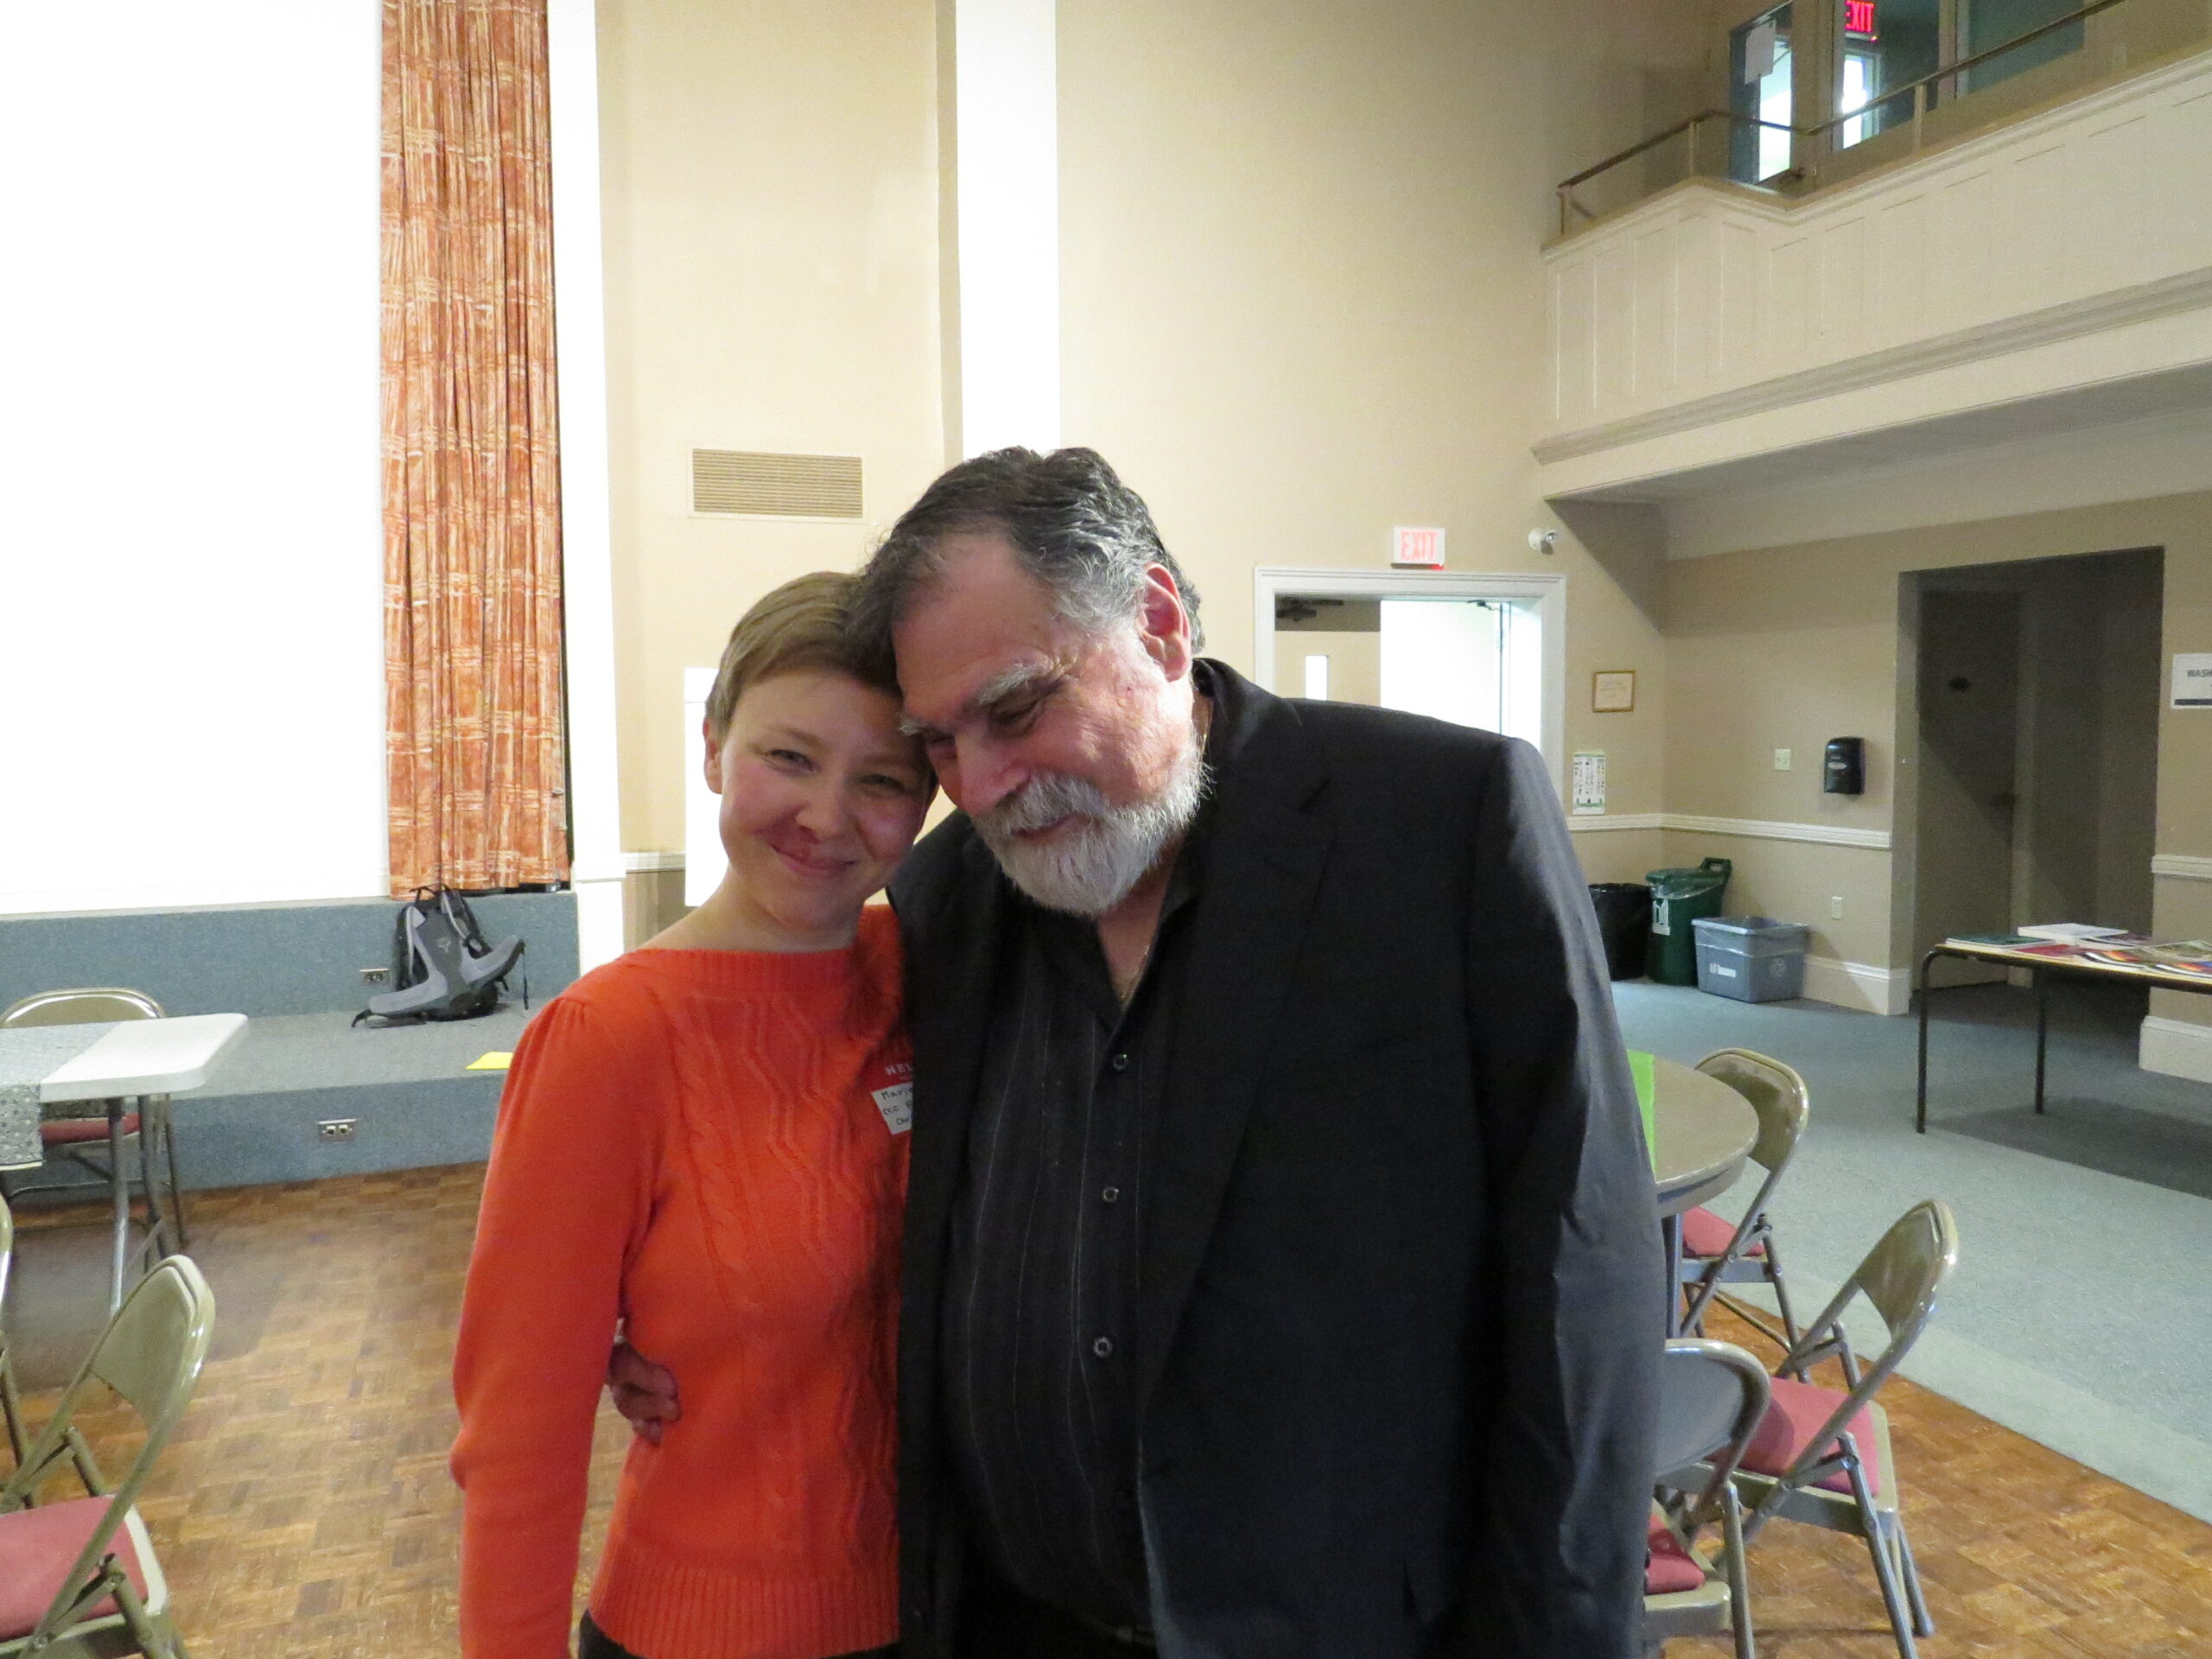 Richard with CFW Coordinator Maria Simakova. Richard was a trusted source of encouragement for Council staff as well as a tremendous advocate for students in theological fields, taking special care to recognize and support the contributions of women in academic and ecumenical contexts.